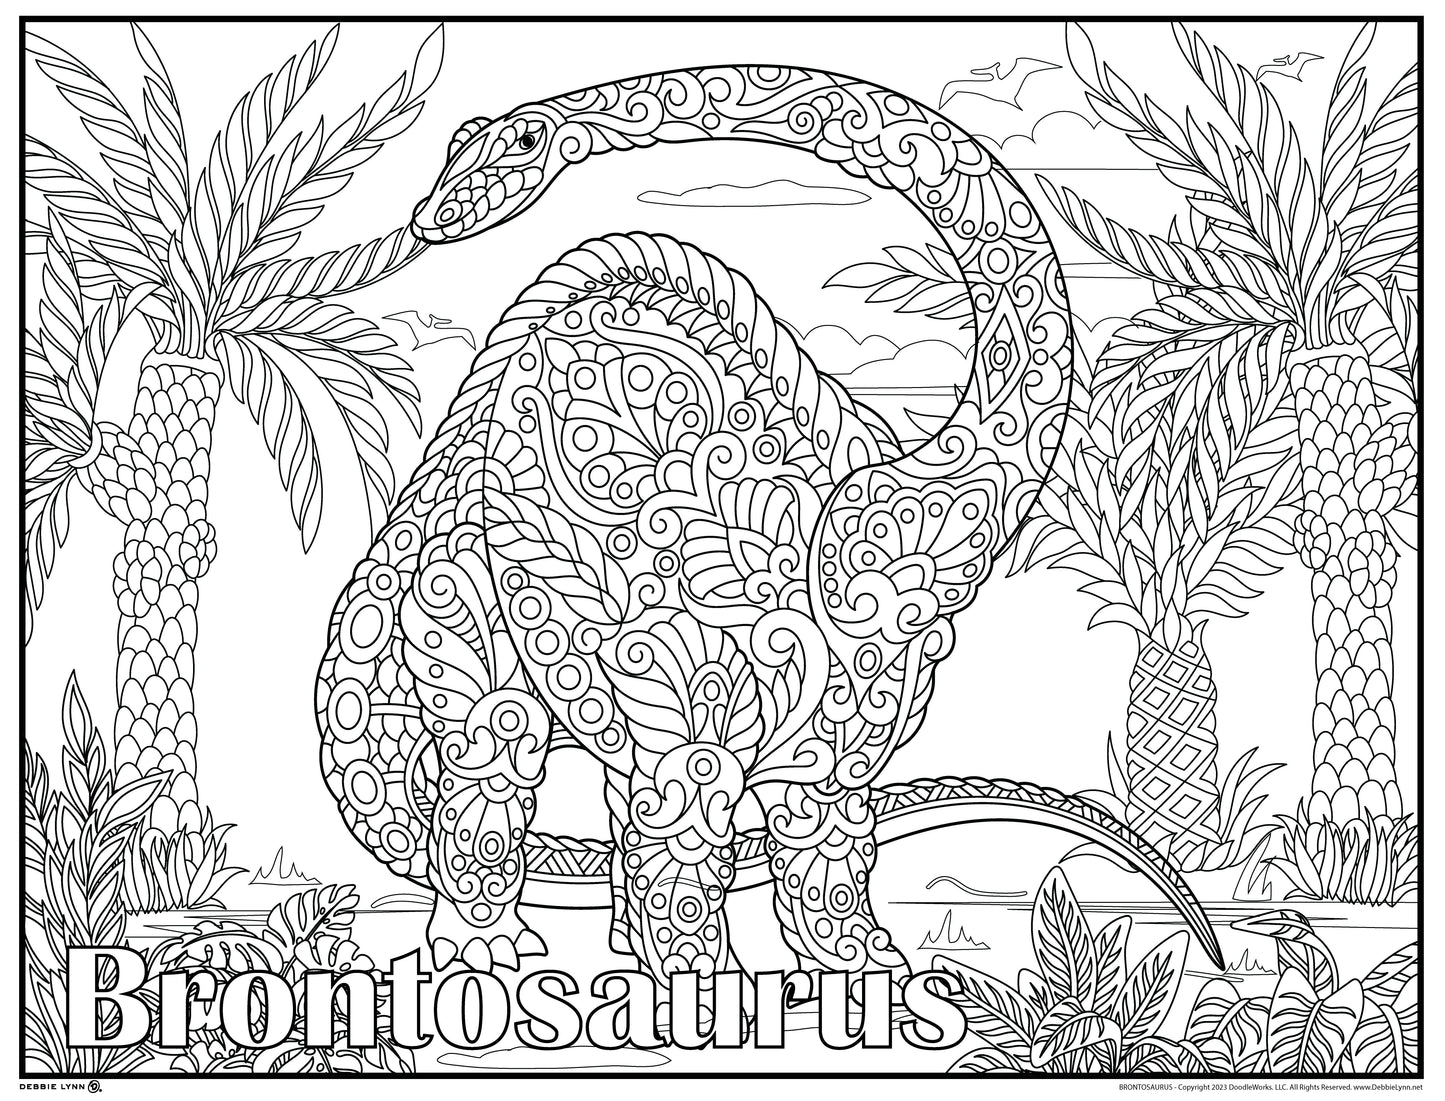 Brontosaurus Dinosaur Personalized Giant Coloring Poster 46"x60"